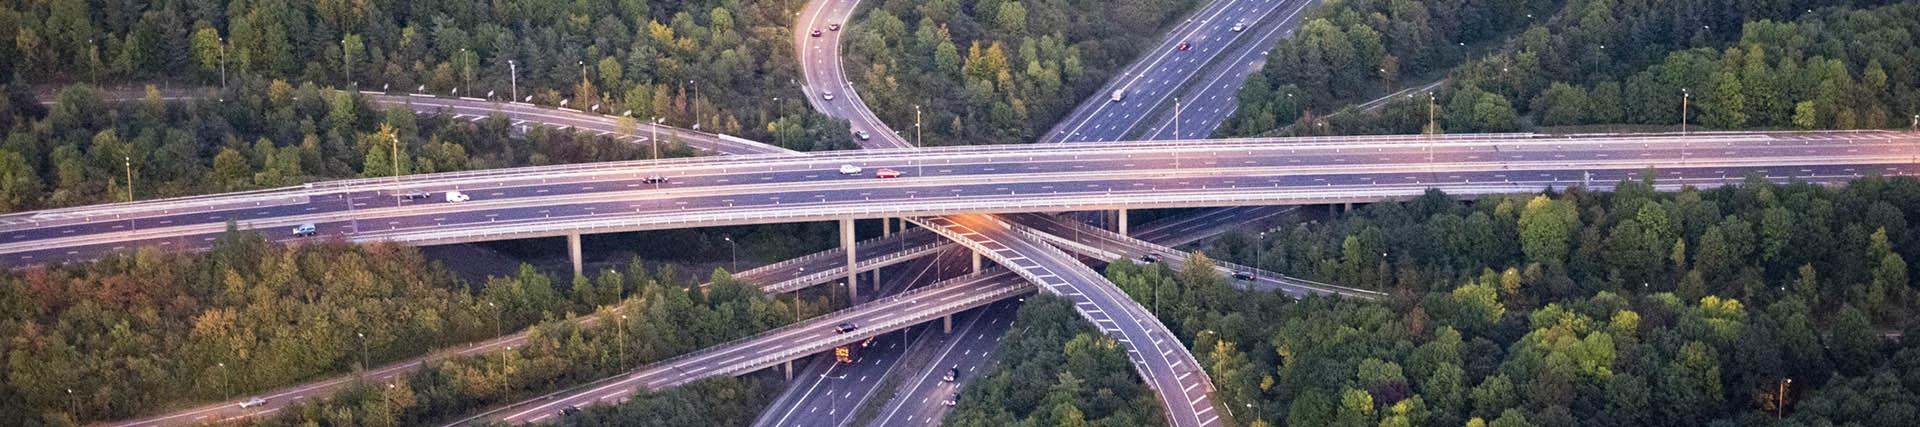 An M25 motorway interchange at dusk, the street lights are on and cars are travelling along the 4 layer elevated major road junction.